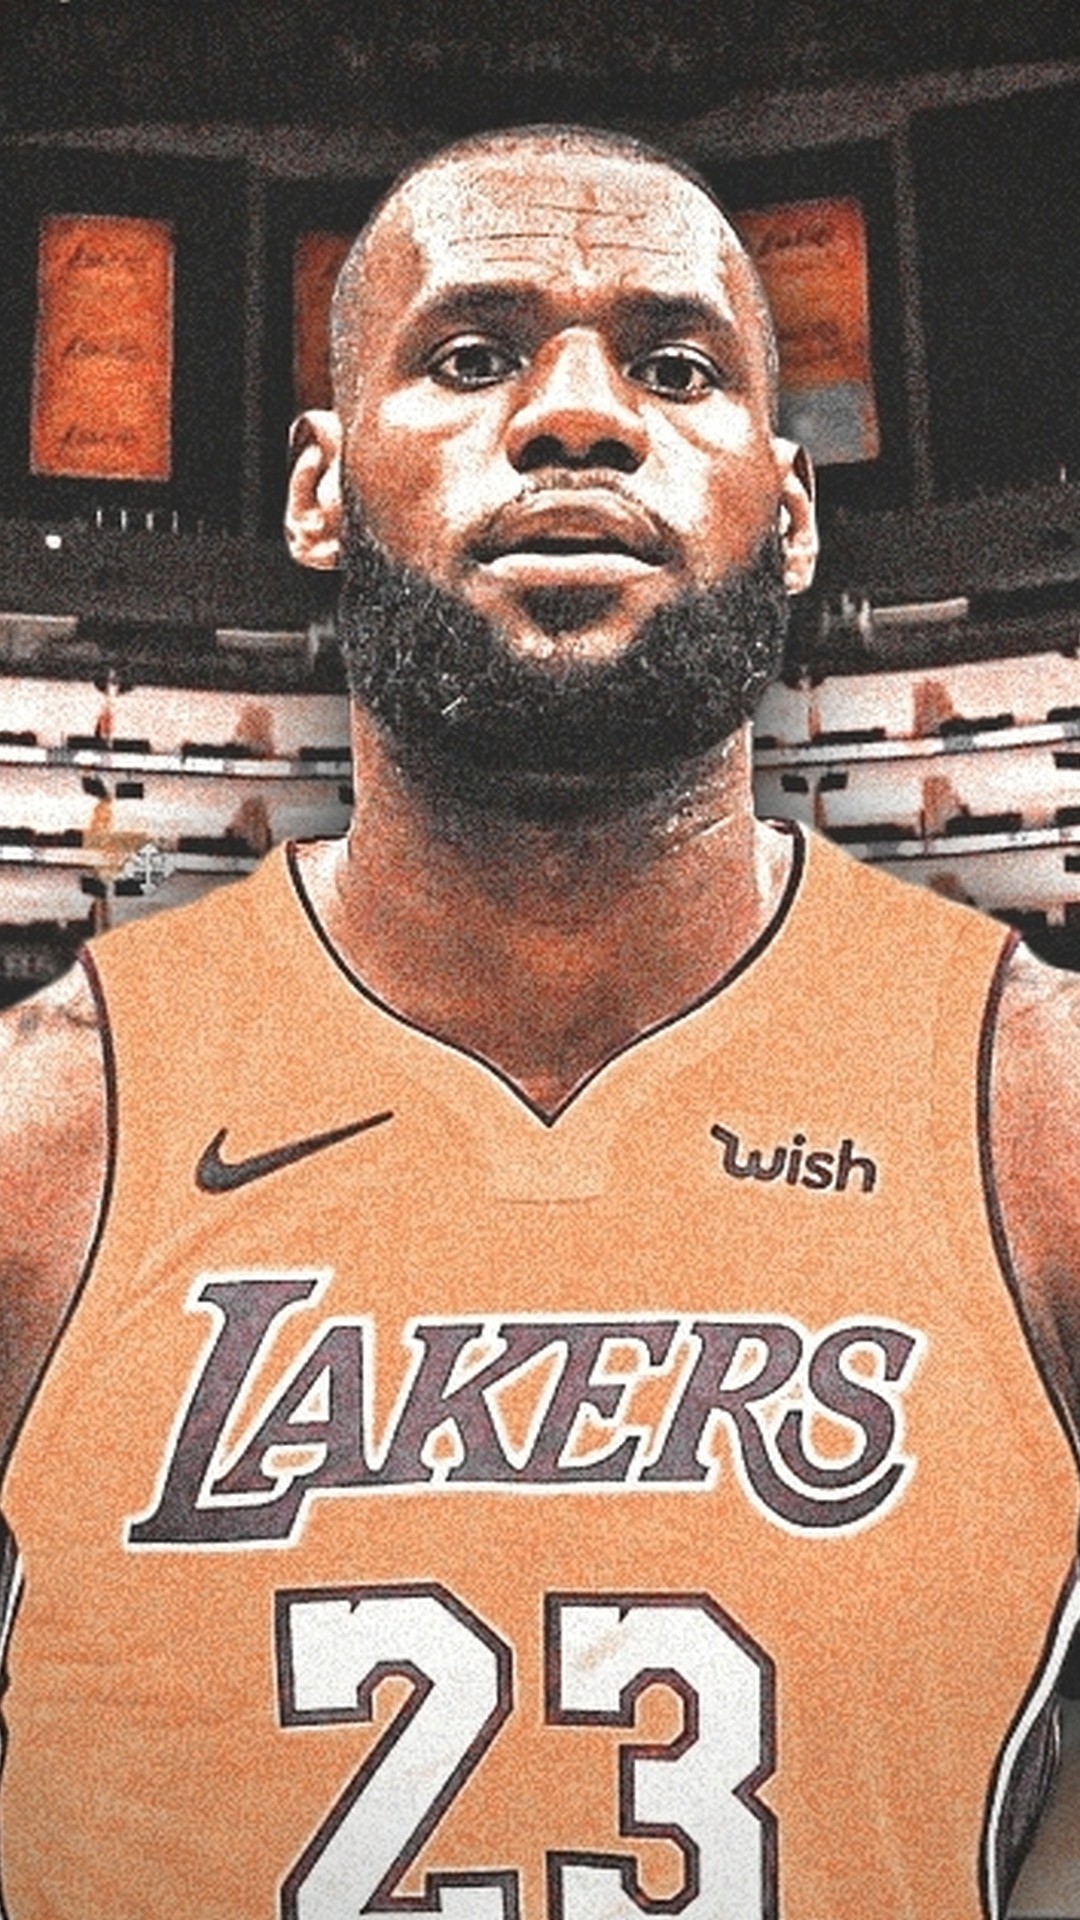 Lebron James Lakers iPhone Wallpaper with high-resolution 1080x1920 pixel. You can use this wallpaper for your iPhone 5, 6, 7, 8, X backgrounds, Mobile Screensaver, or iPad Lock Screen